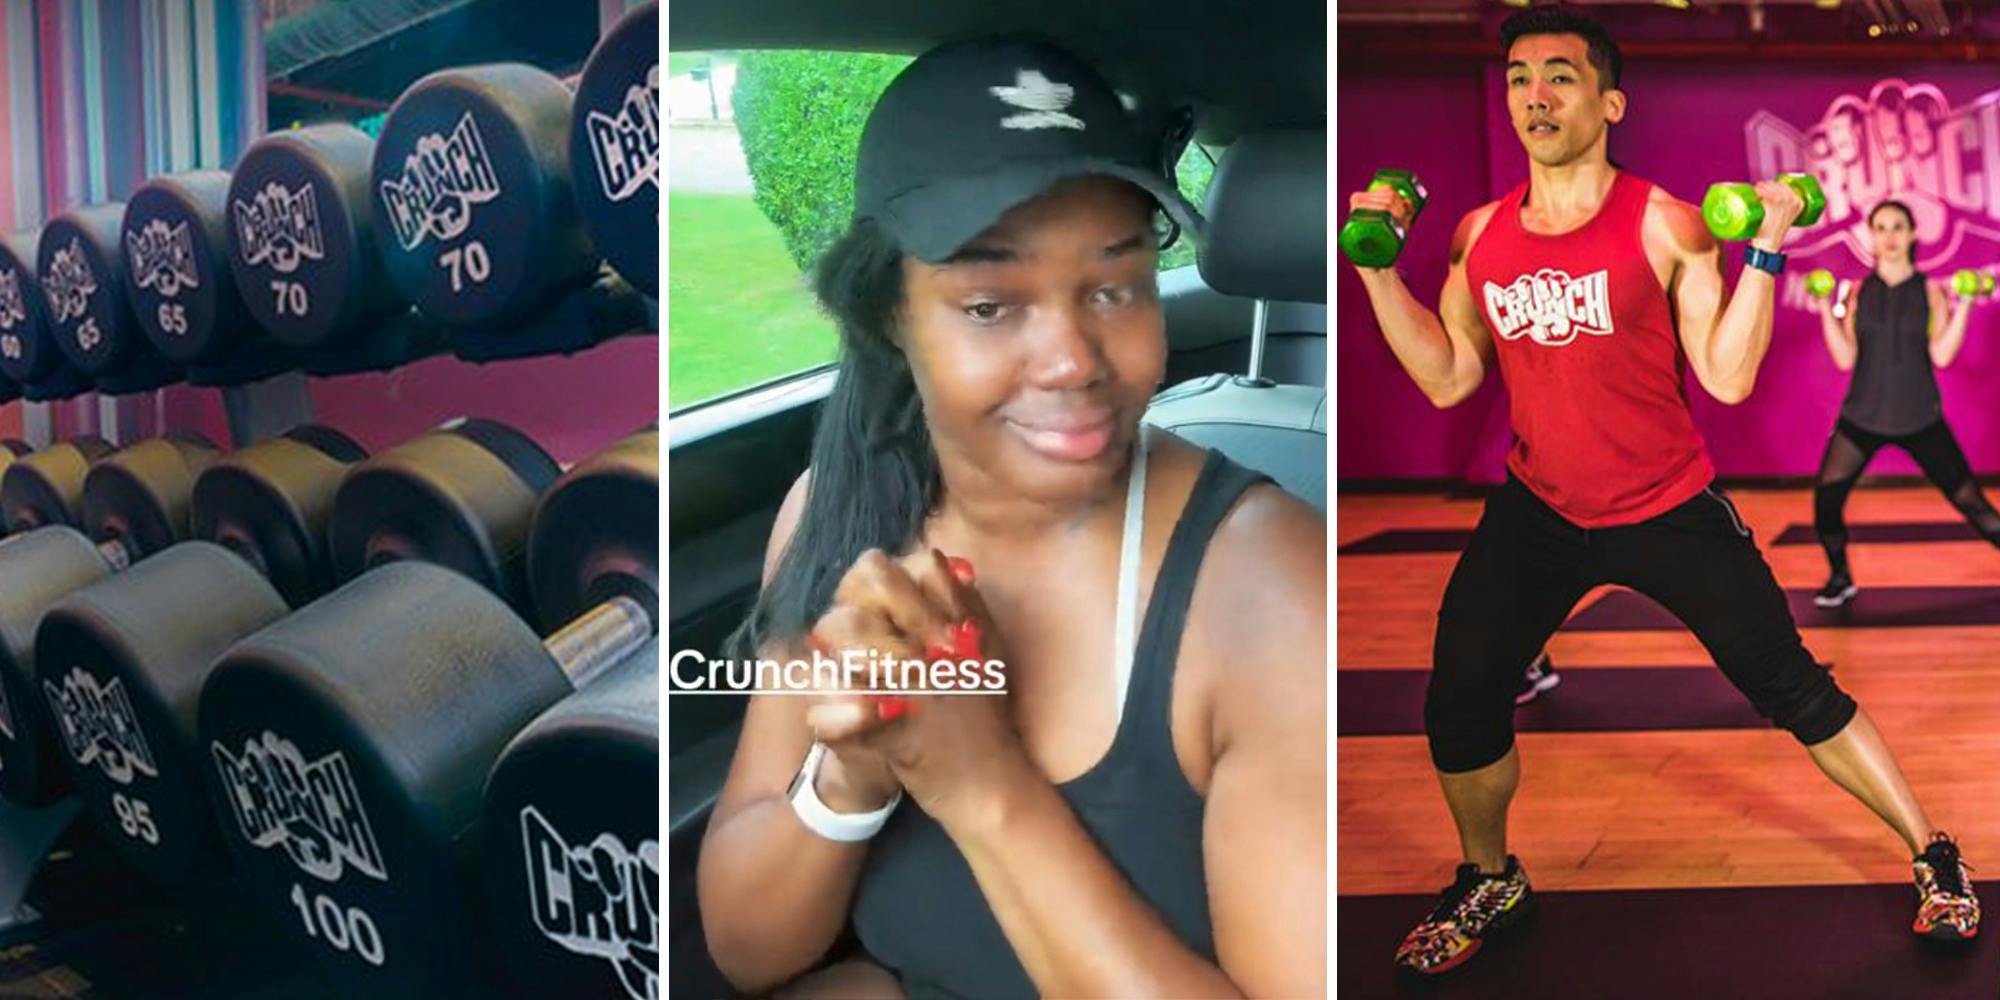 ‘She pays ,000 a month’: Customer warns against Crunch Fitness after ‘embarrassing’ interaction with ‘disgusting’ trainer